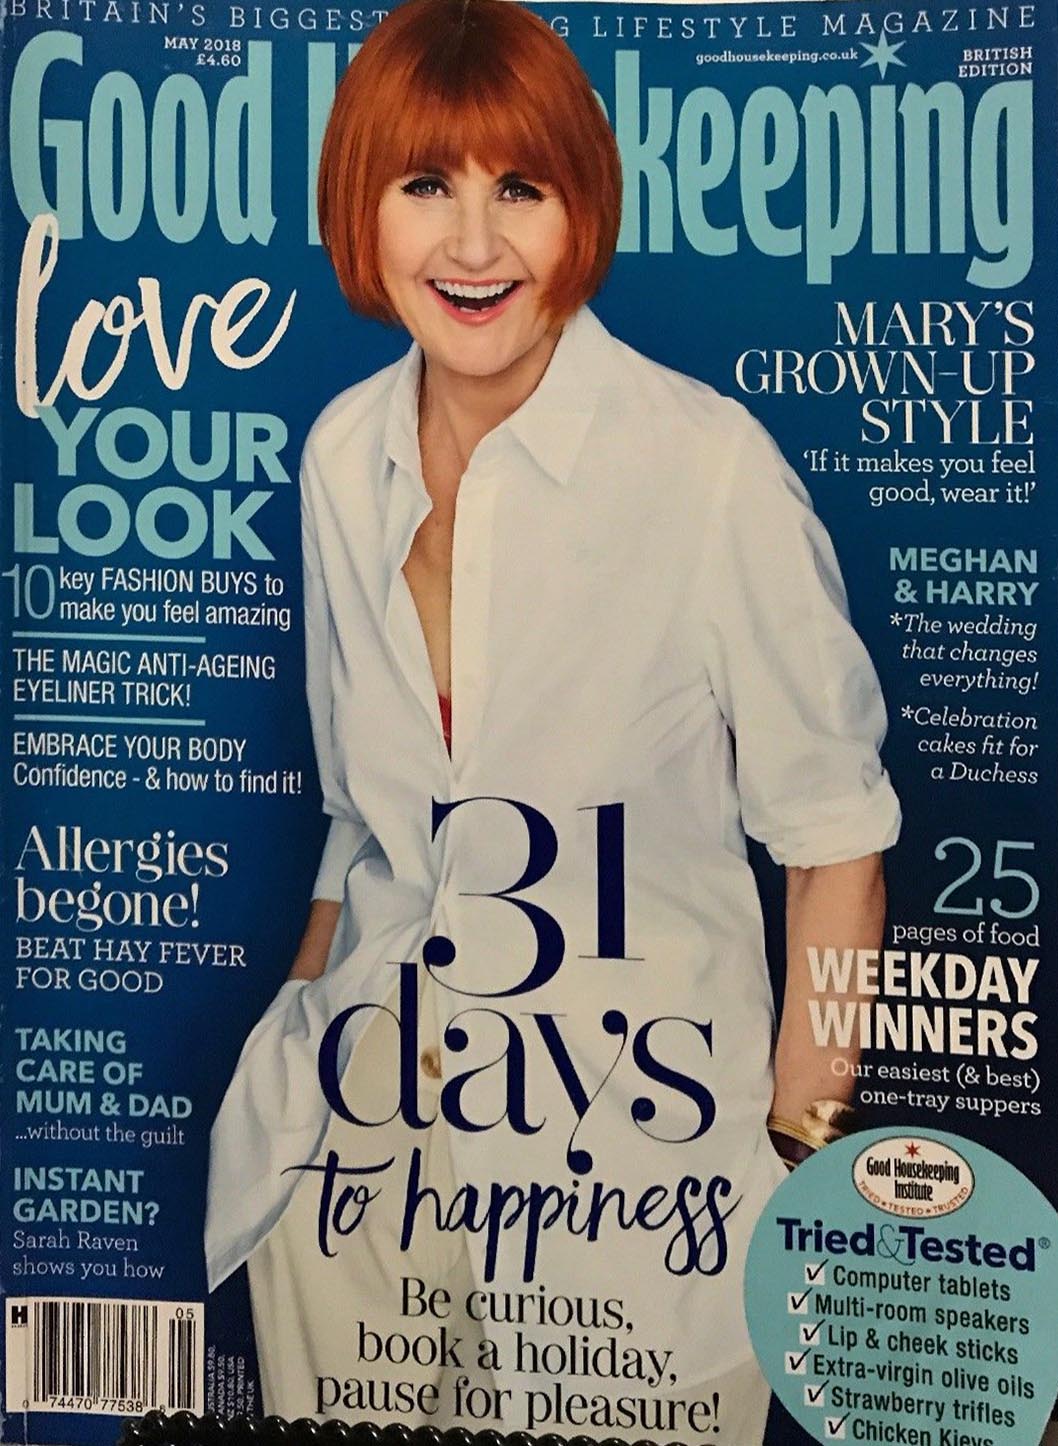 Good Housekeeping May 2018 magazine back issue Good Housekeeping magizine back copy Good Housekeeping May 2018 American womens magazine Back Issue Published by Hearst Publishing Corporation. Love Your Look 10 Key Fashion Buys To Make You Feel Amazing.